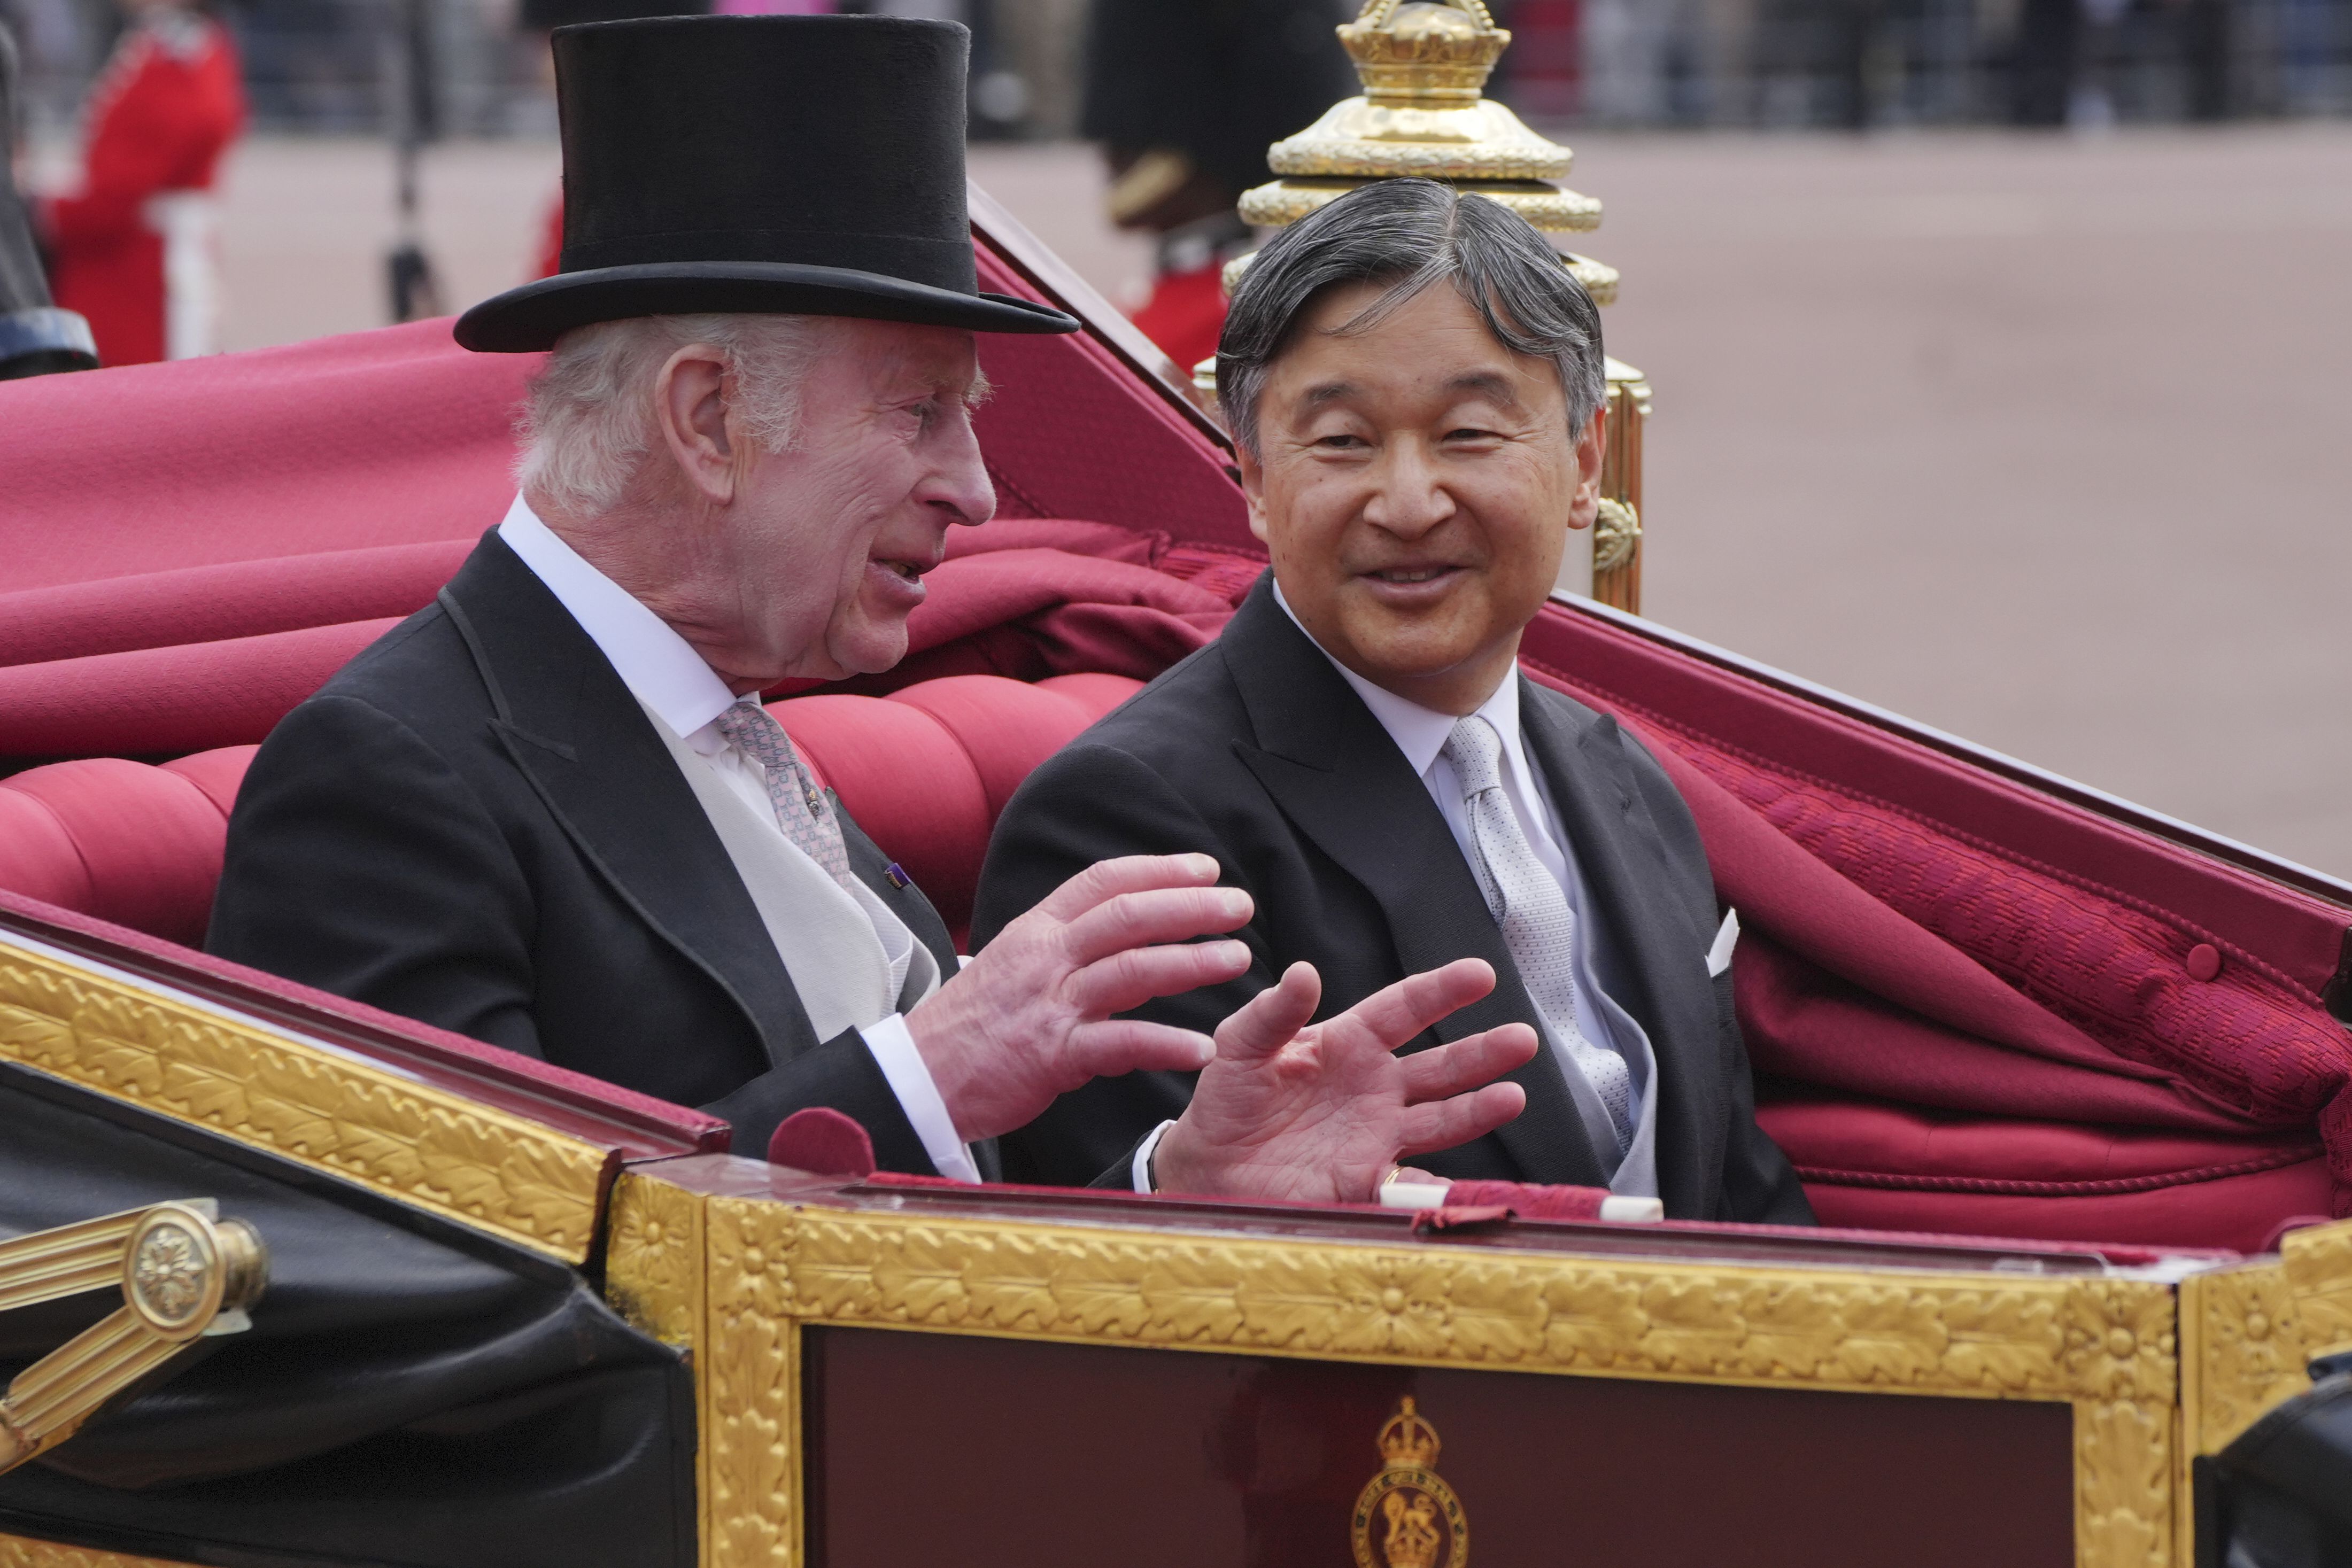 Britain's King Charles III welcomes the visiting Japanese emperor and empress thumbnail